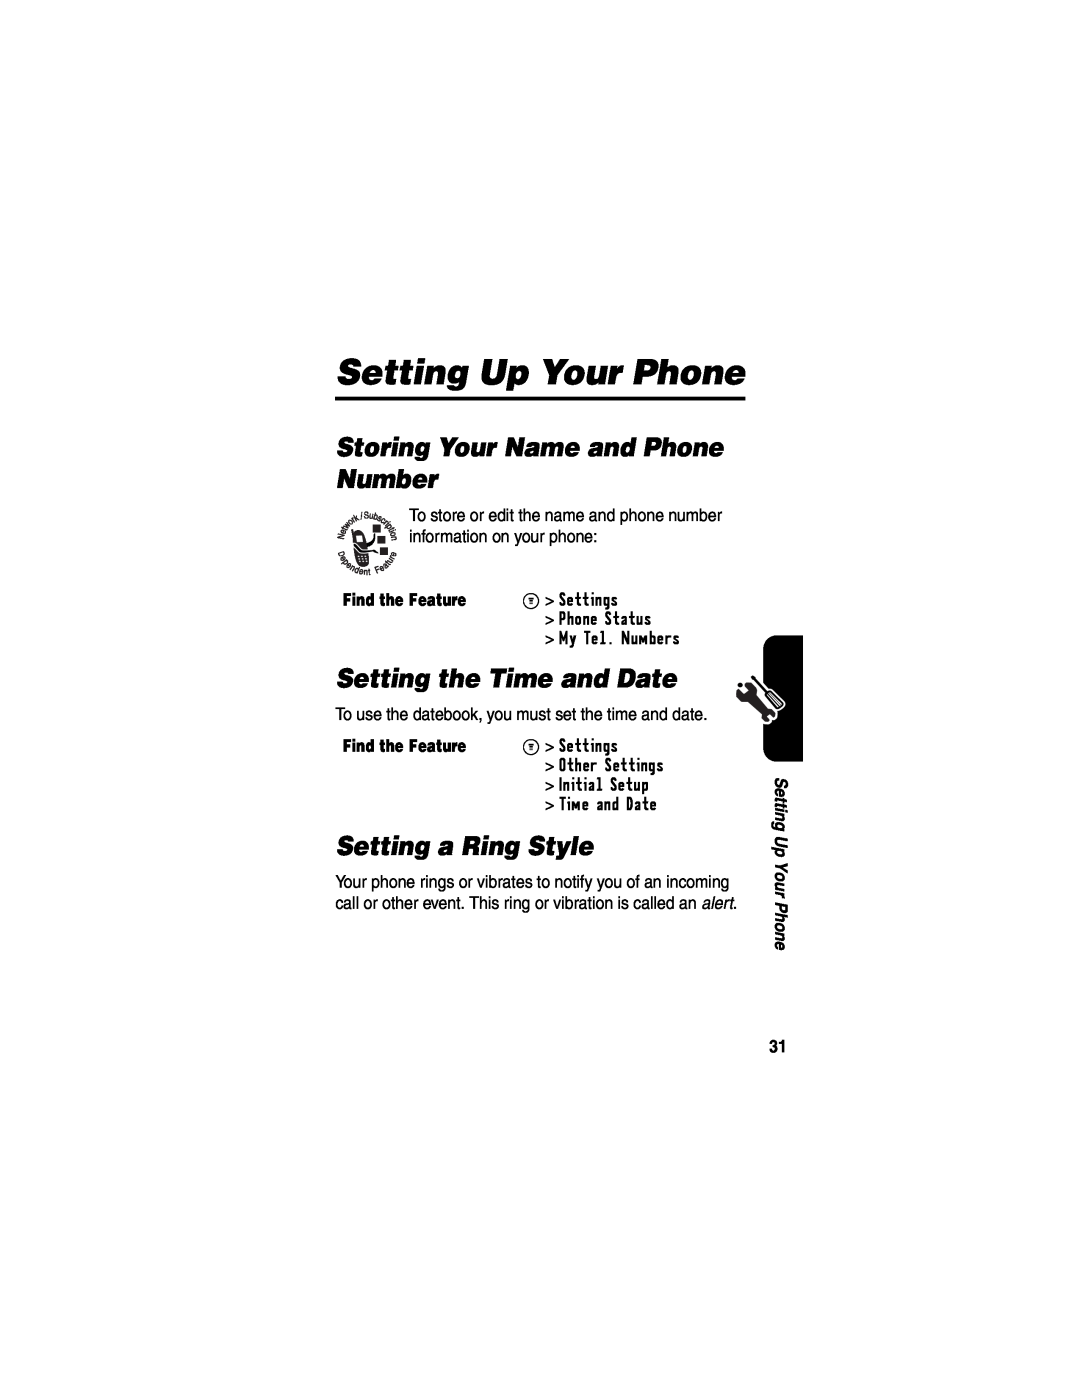 Motorola C341a Setting Up Your Phone, Storing Your Name and Phone Number, Setting the Time and Date, Setting a Ring Style 